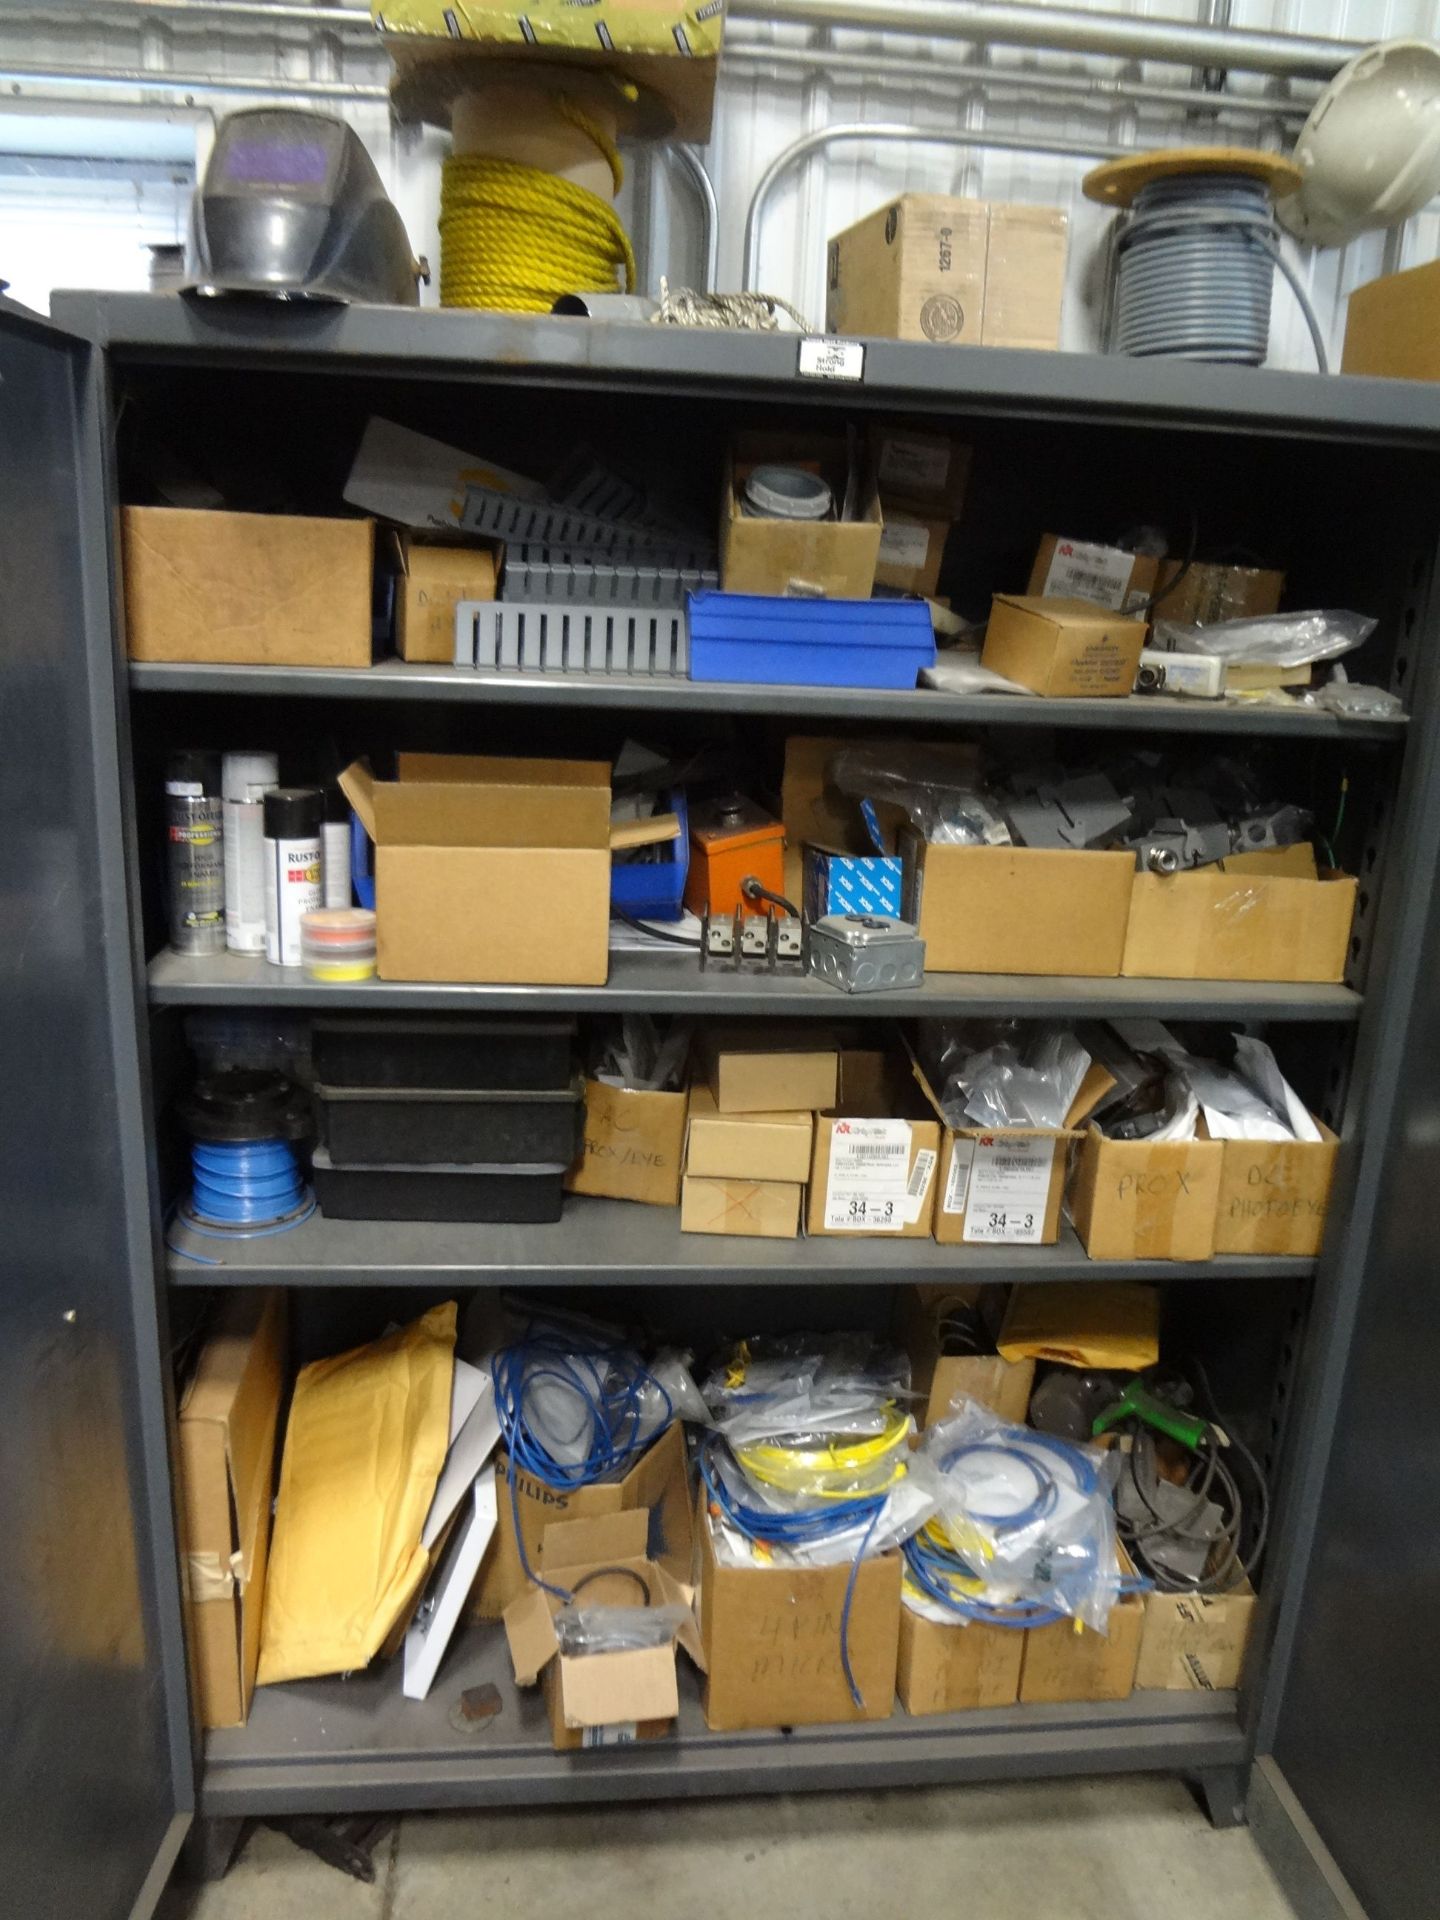 CONTENTS OF CABINET INCLUDING ELECTRICAL AND CORD SETS